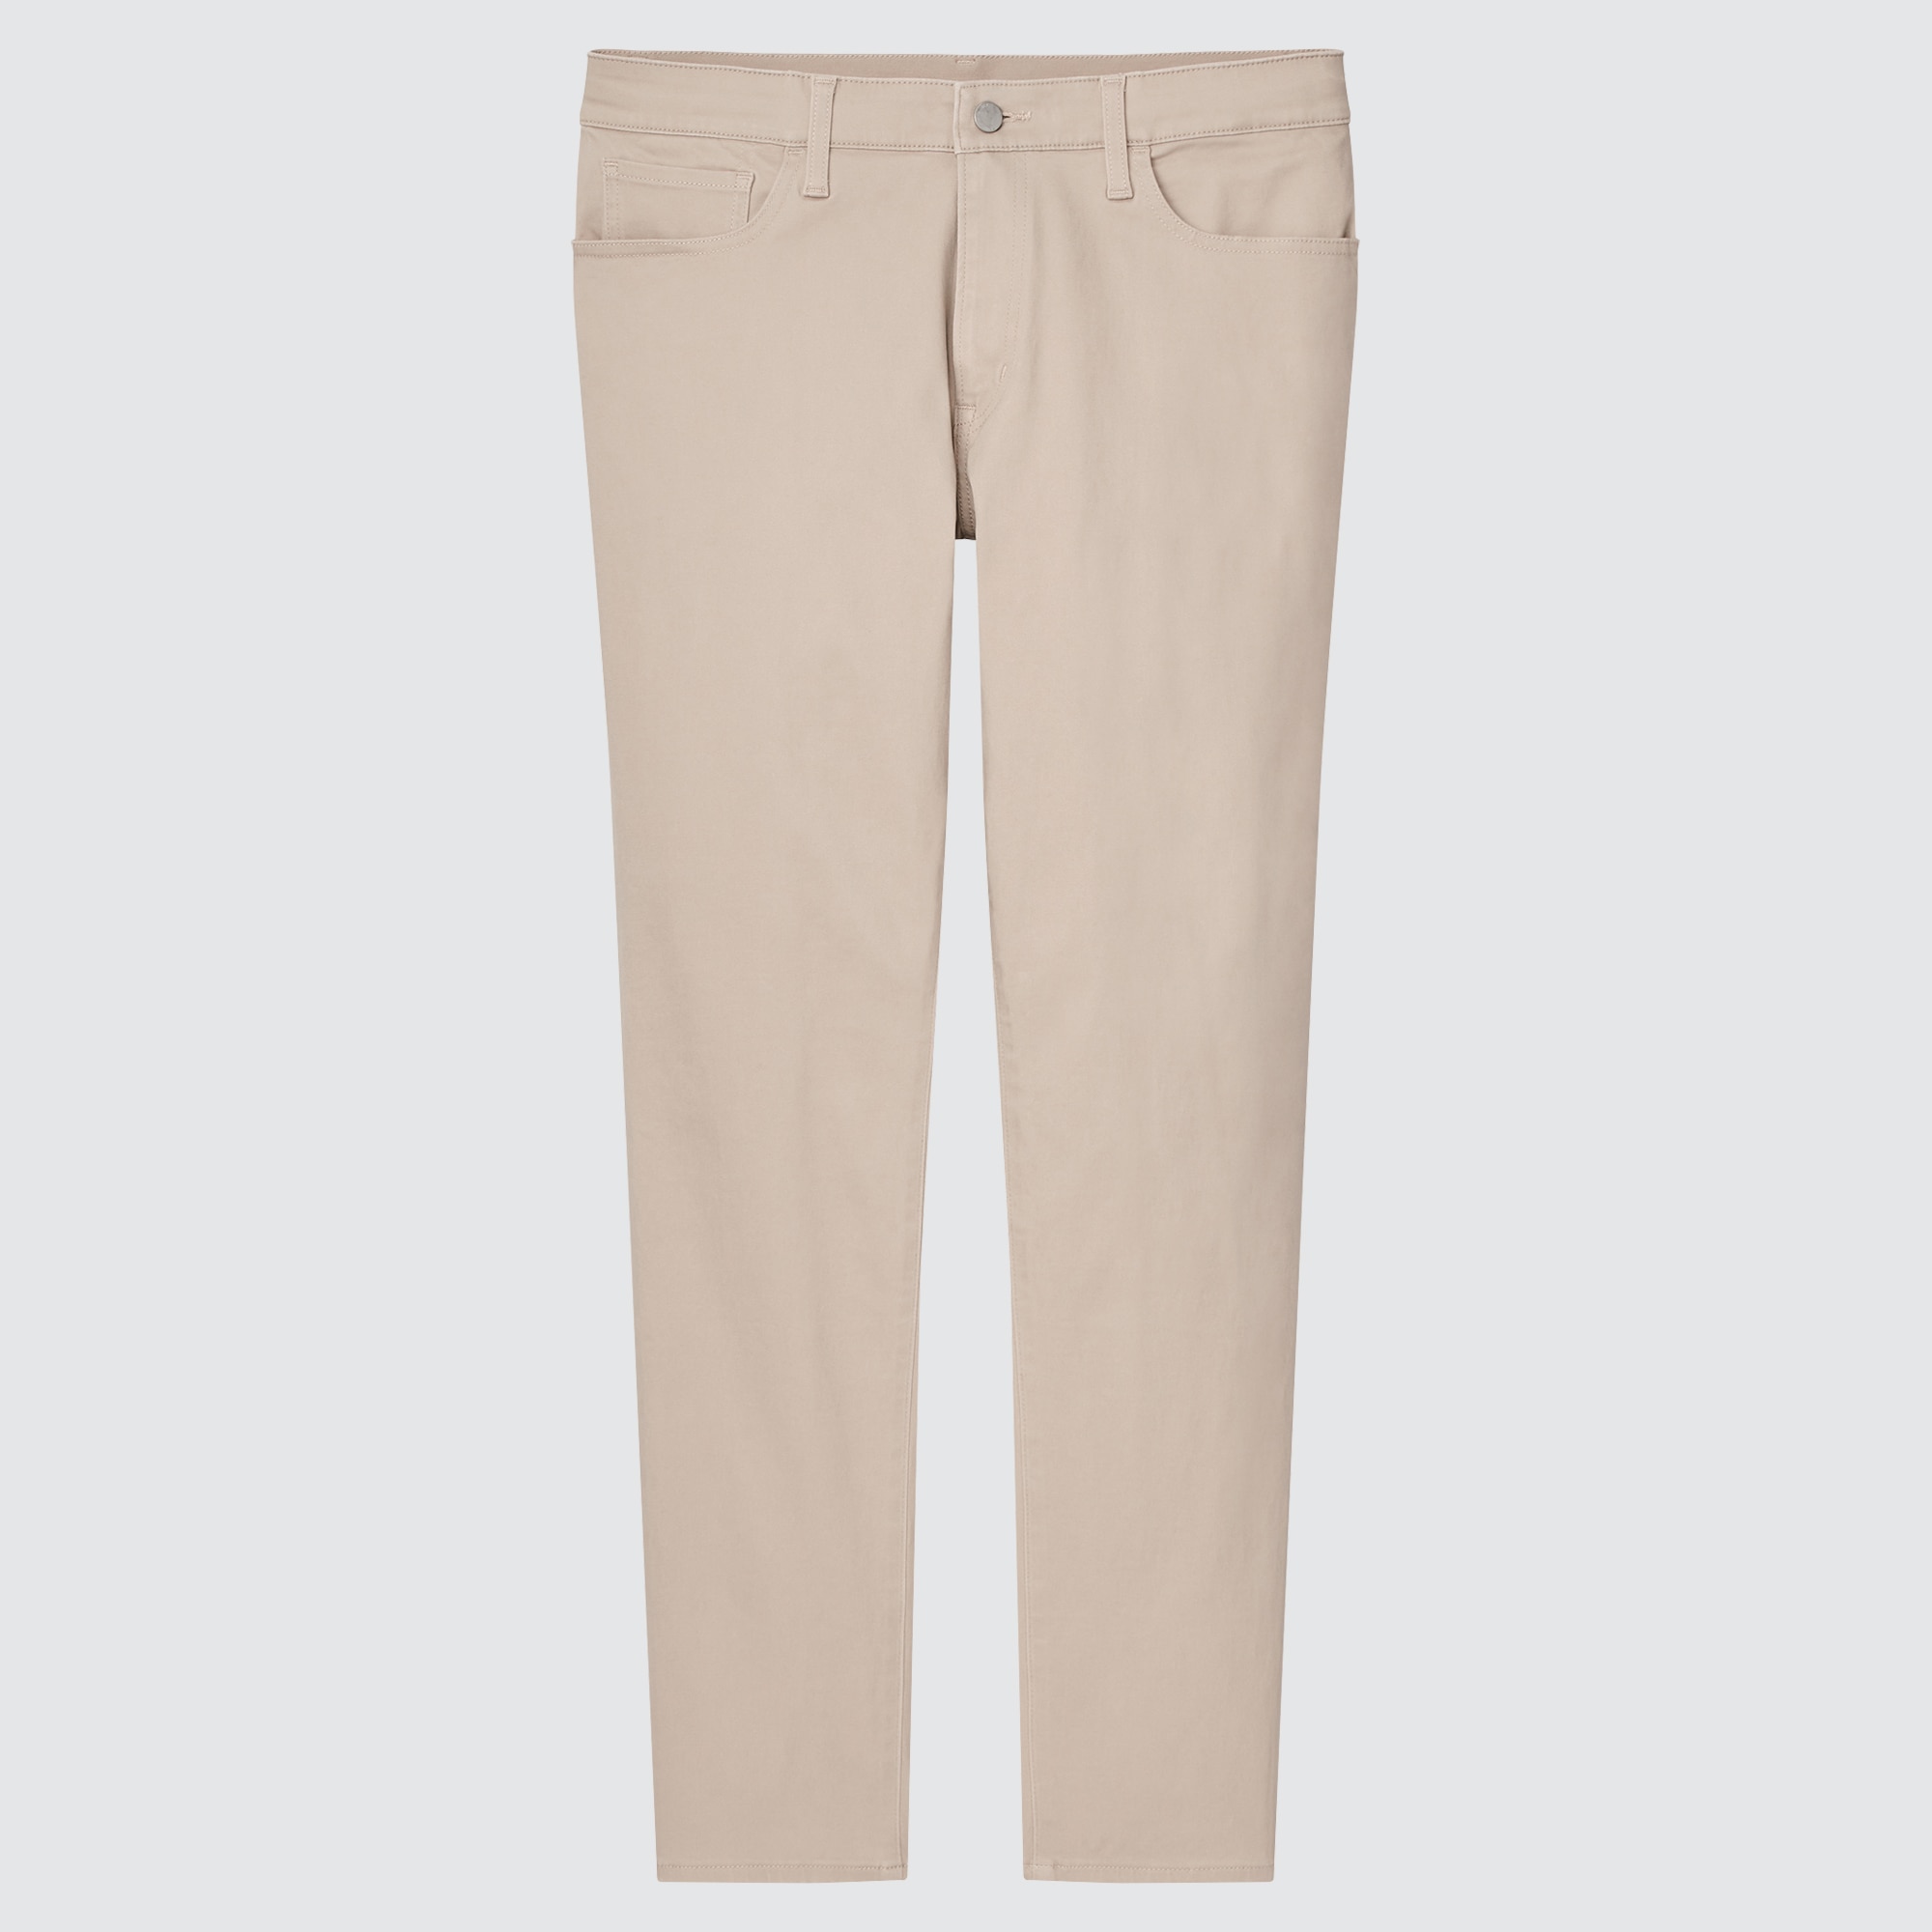 UNIQLO Ultra Stretch Skinny-Fit Color Jeans (Tall)